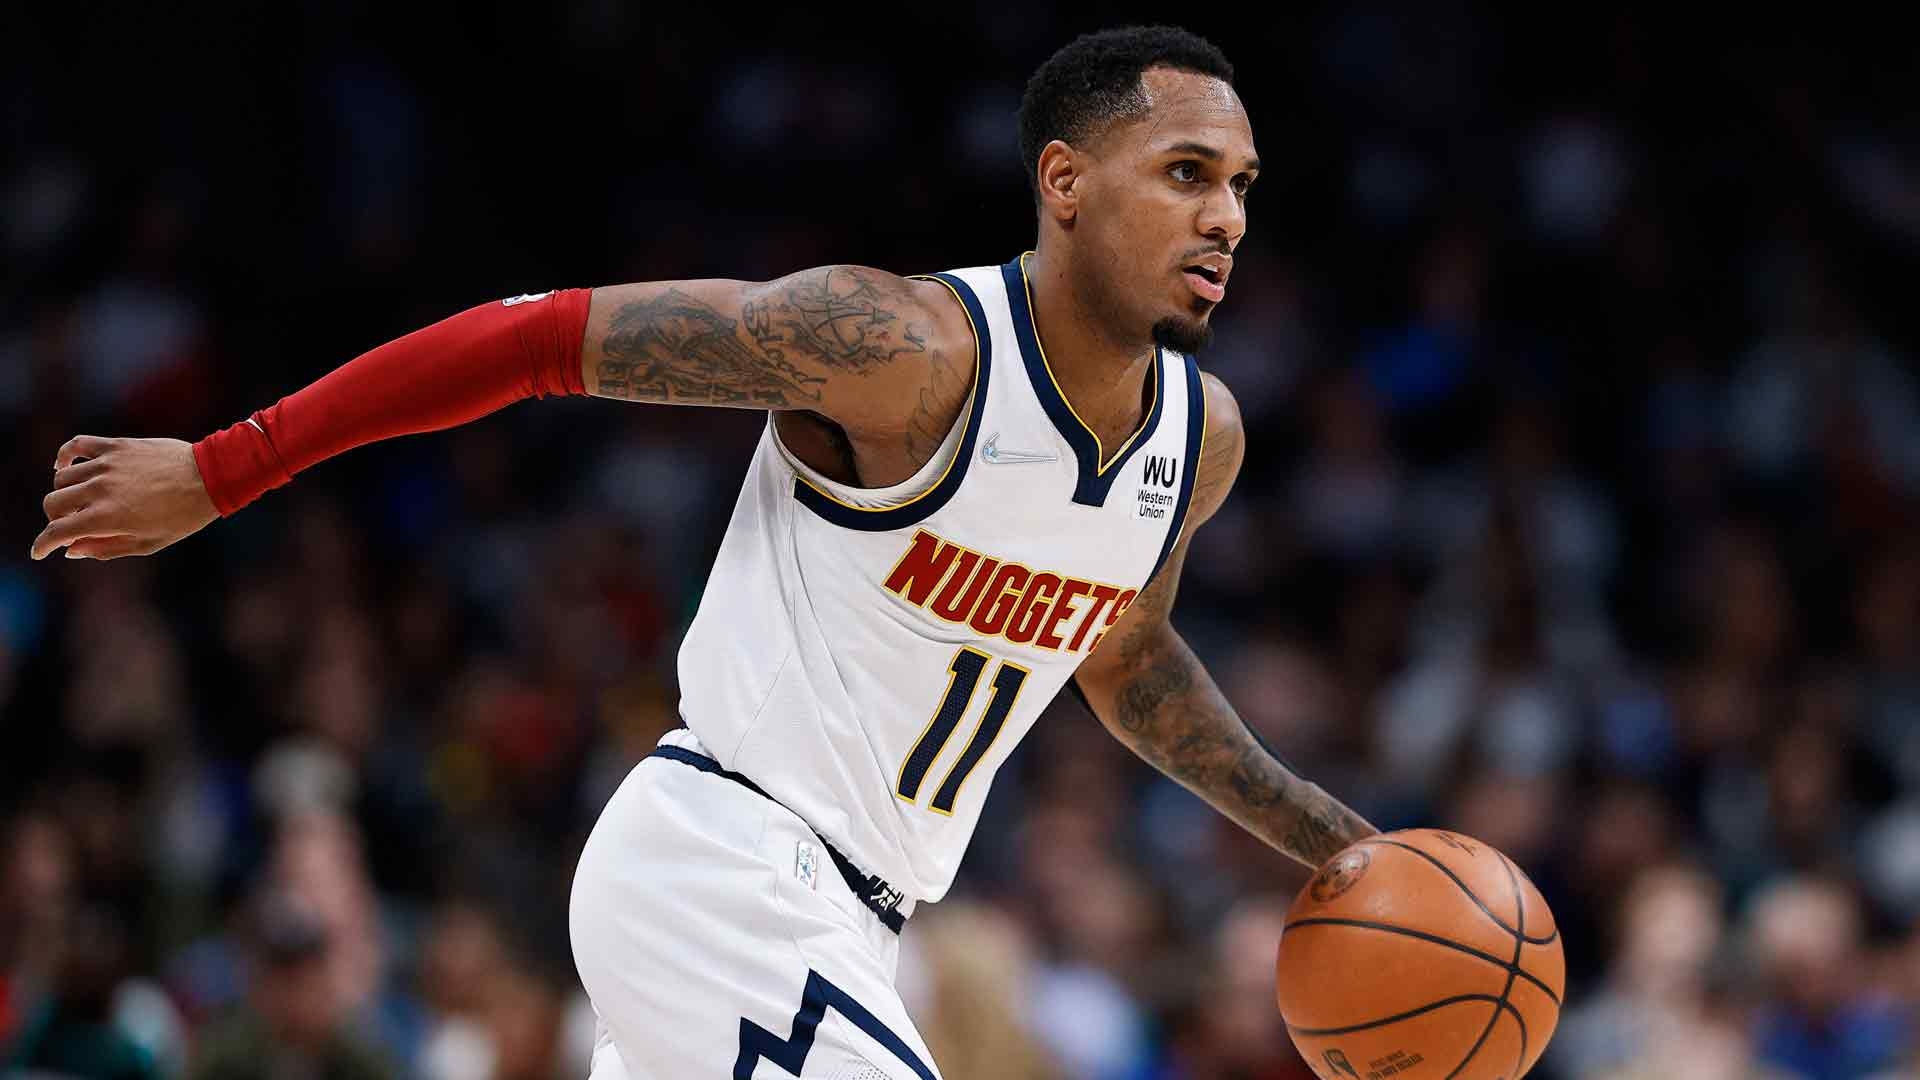 Monte Morris ready to take his game to another level as Wizards’ point